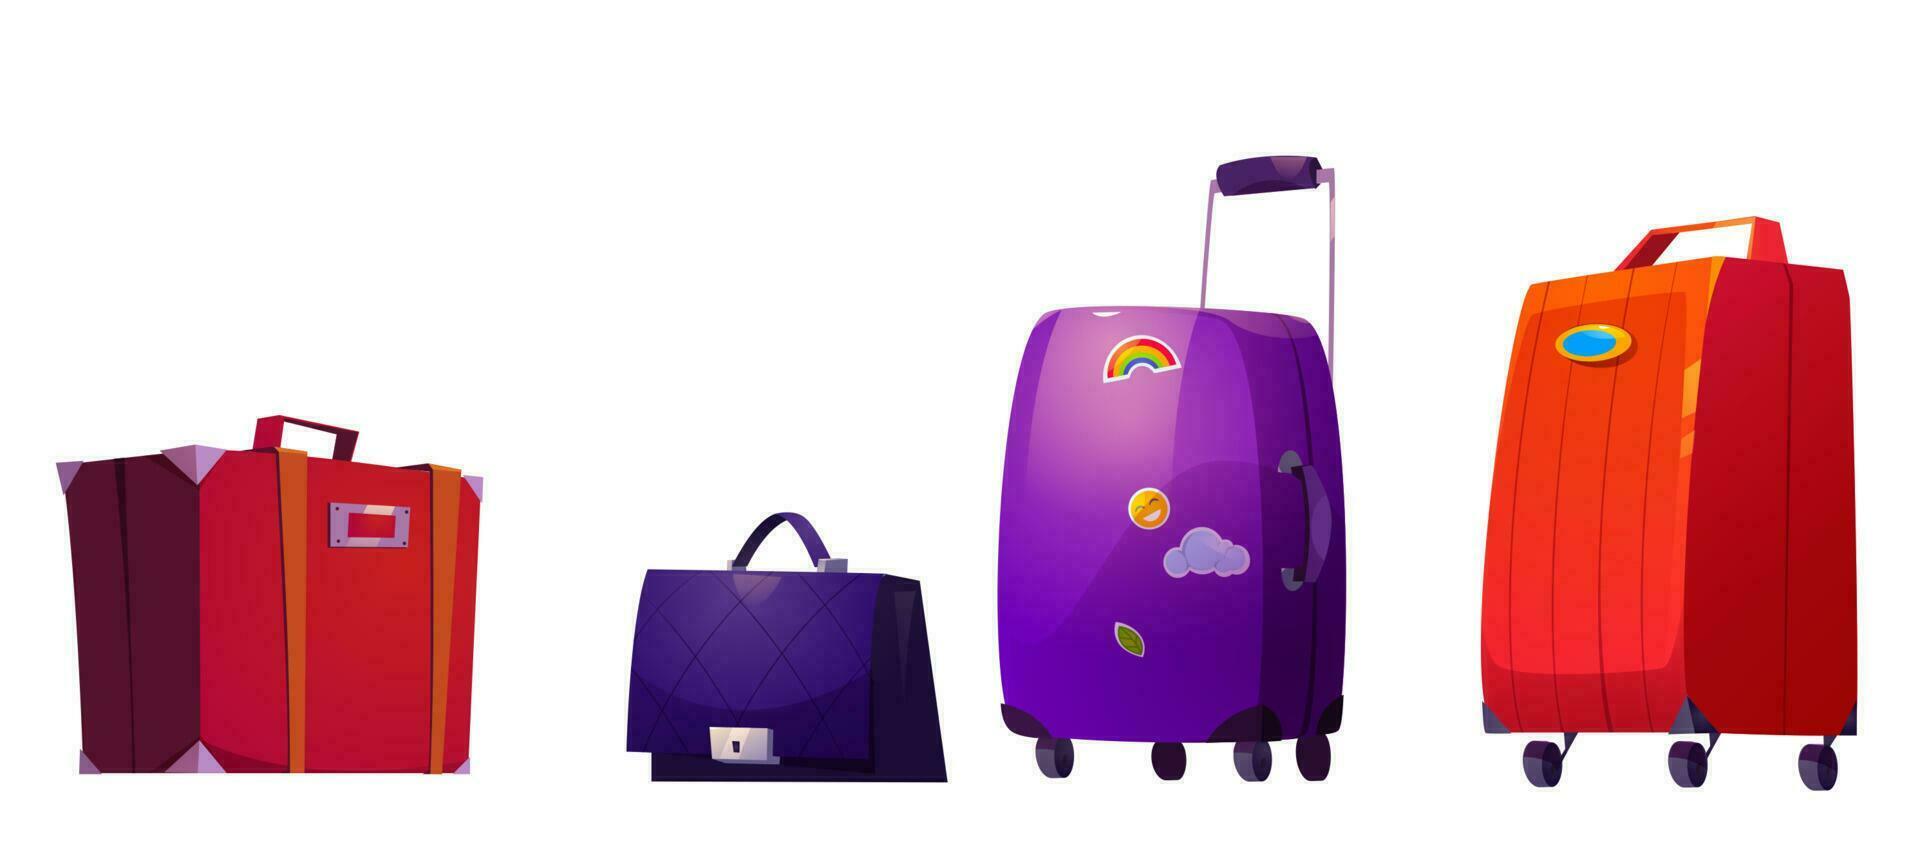 Suitcases, travel luggage, baggage and bags set vector